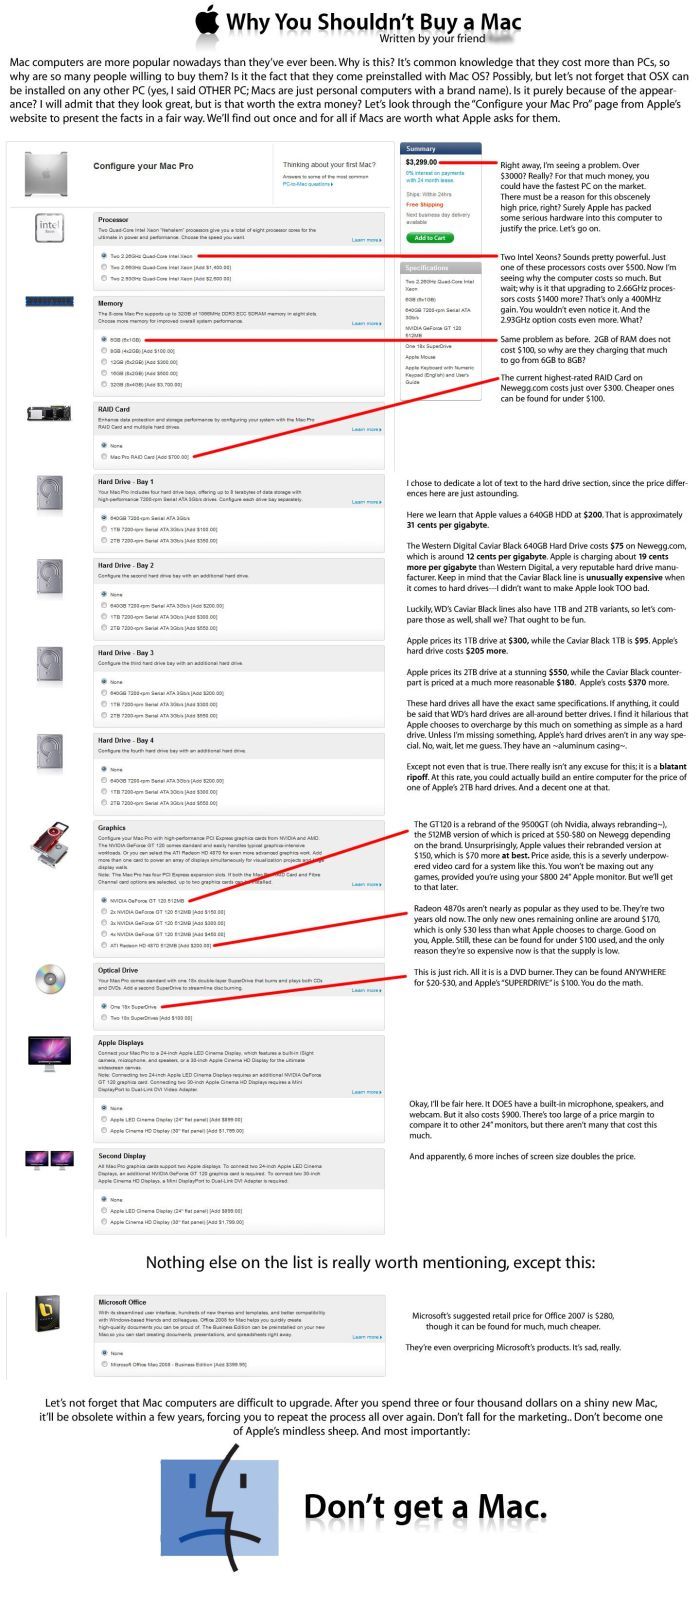 Why You Shouldn't Buy a Mac (1 pic)